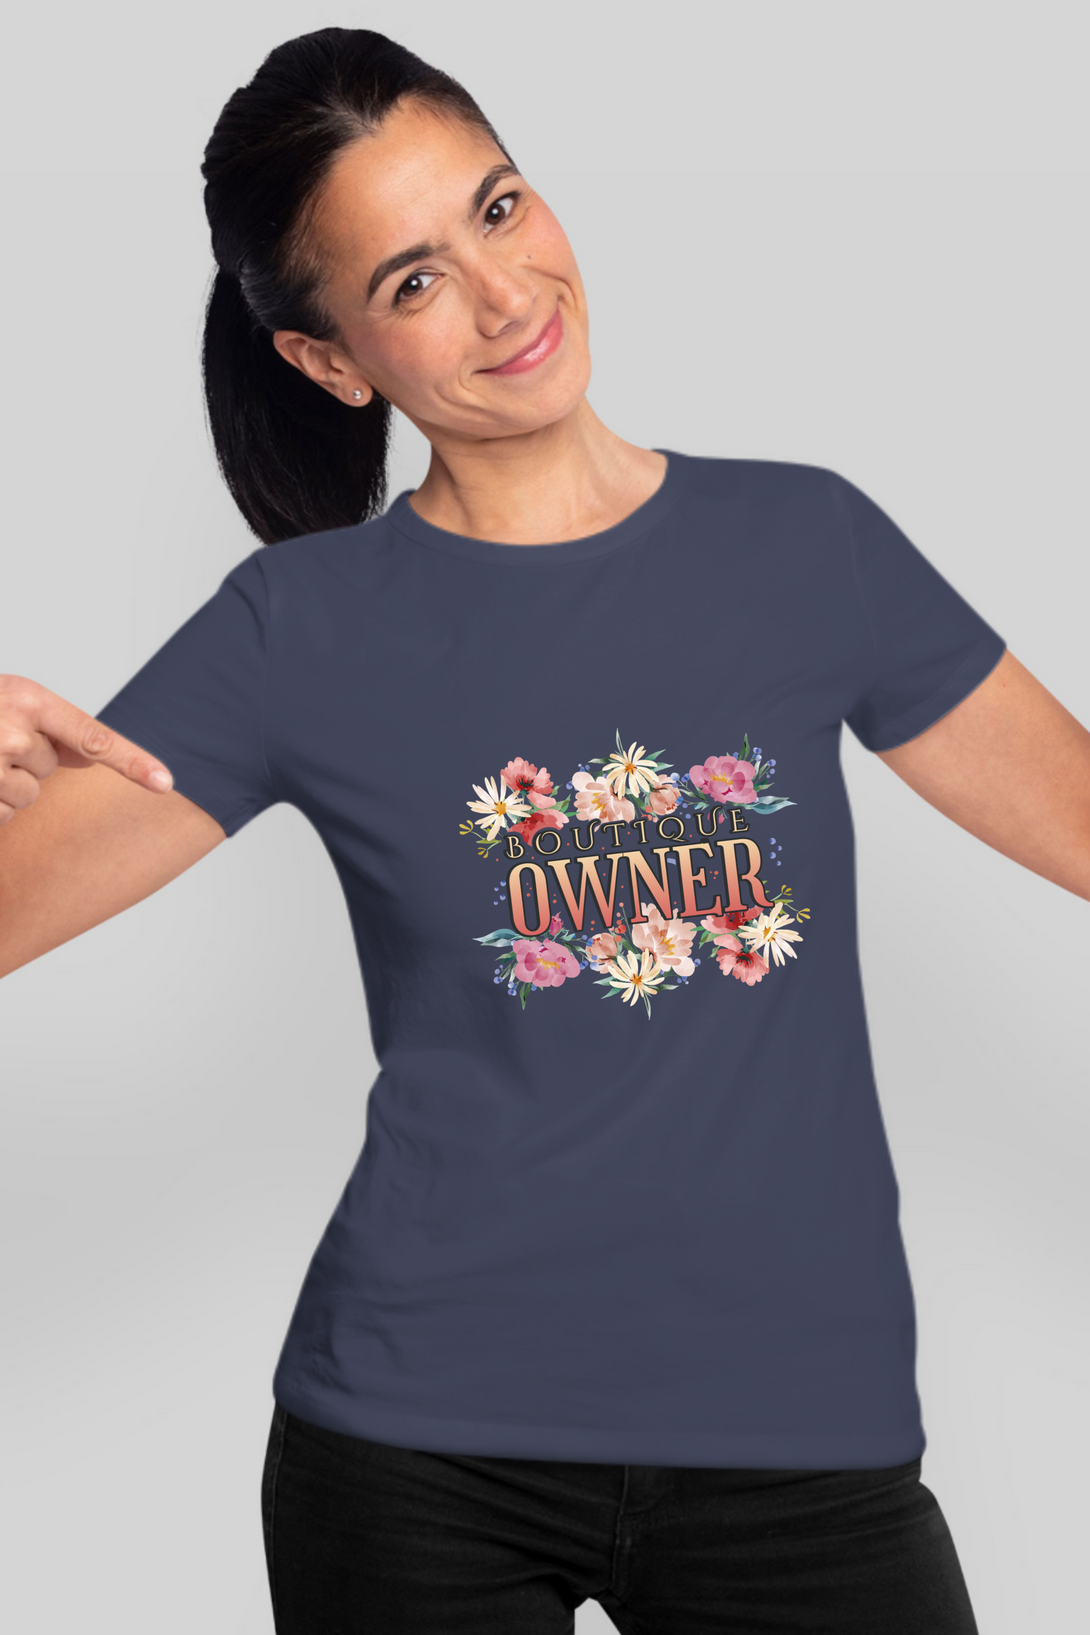 Flowers Boutique Printed T-Shirt For Women - WowWaves - 9